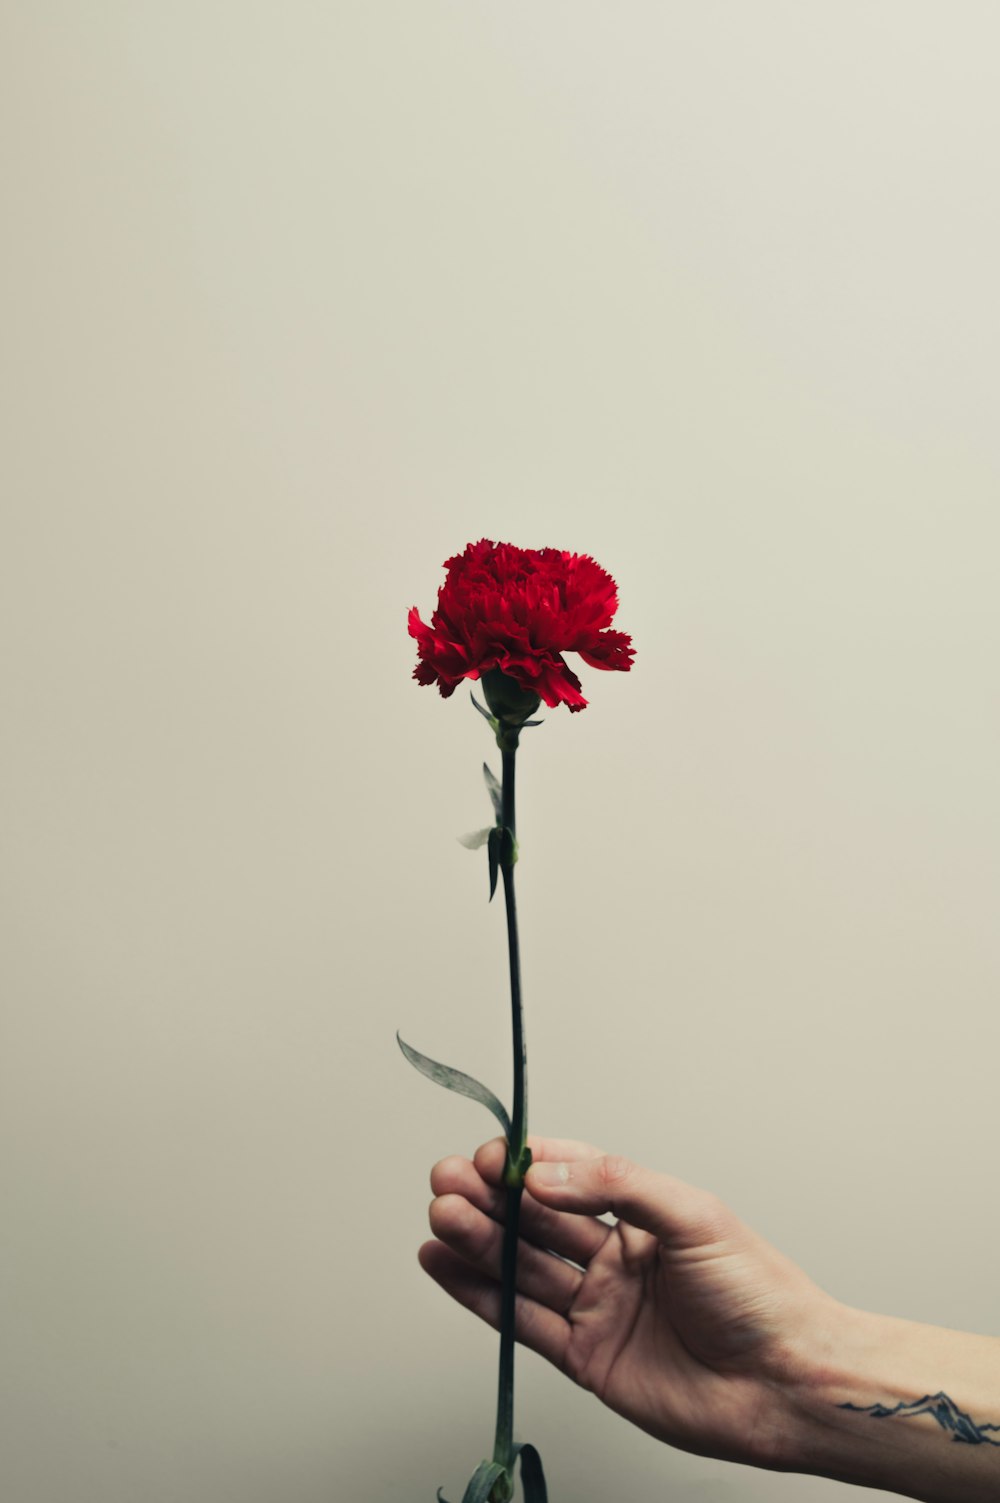 person holding red rose flower